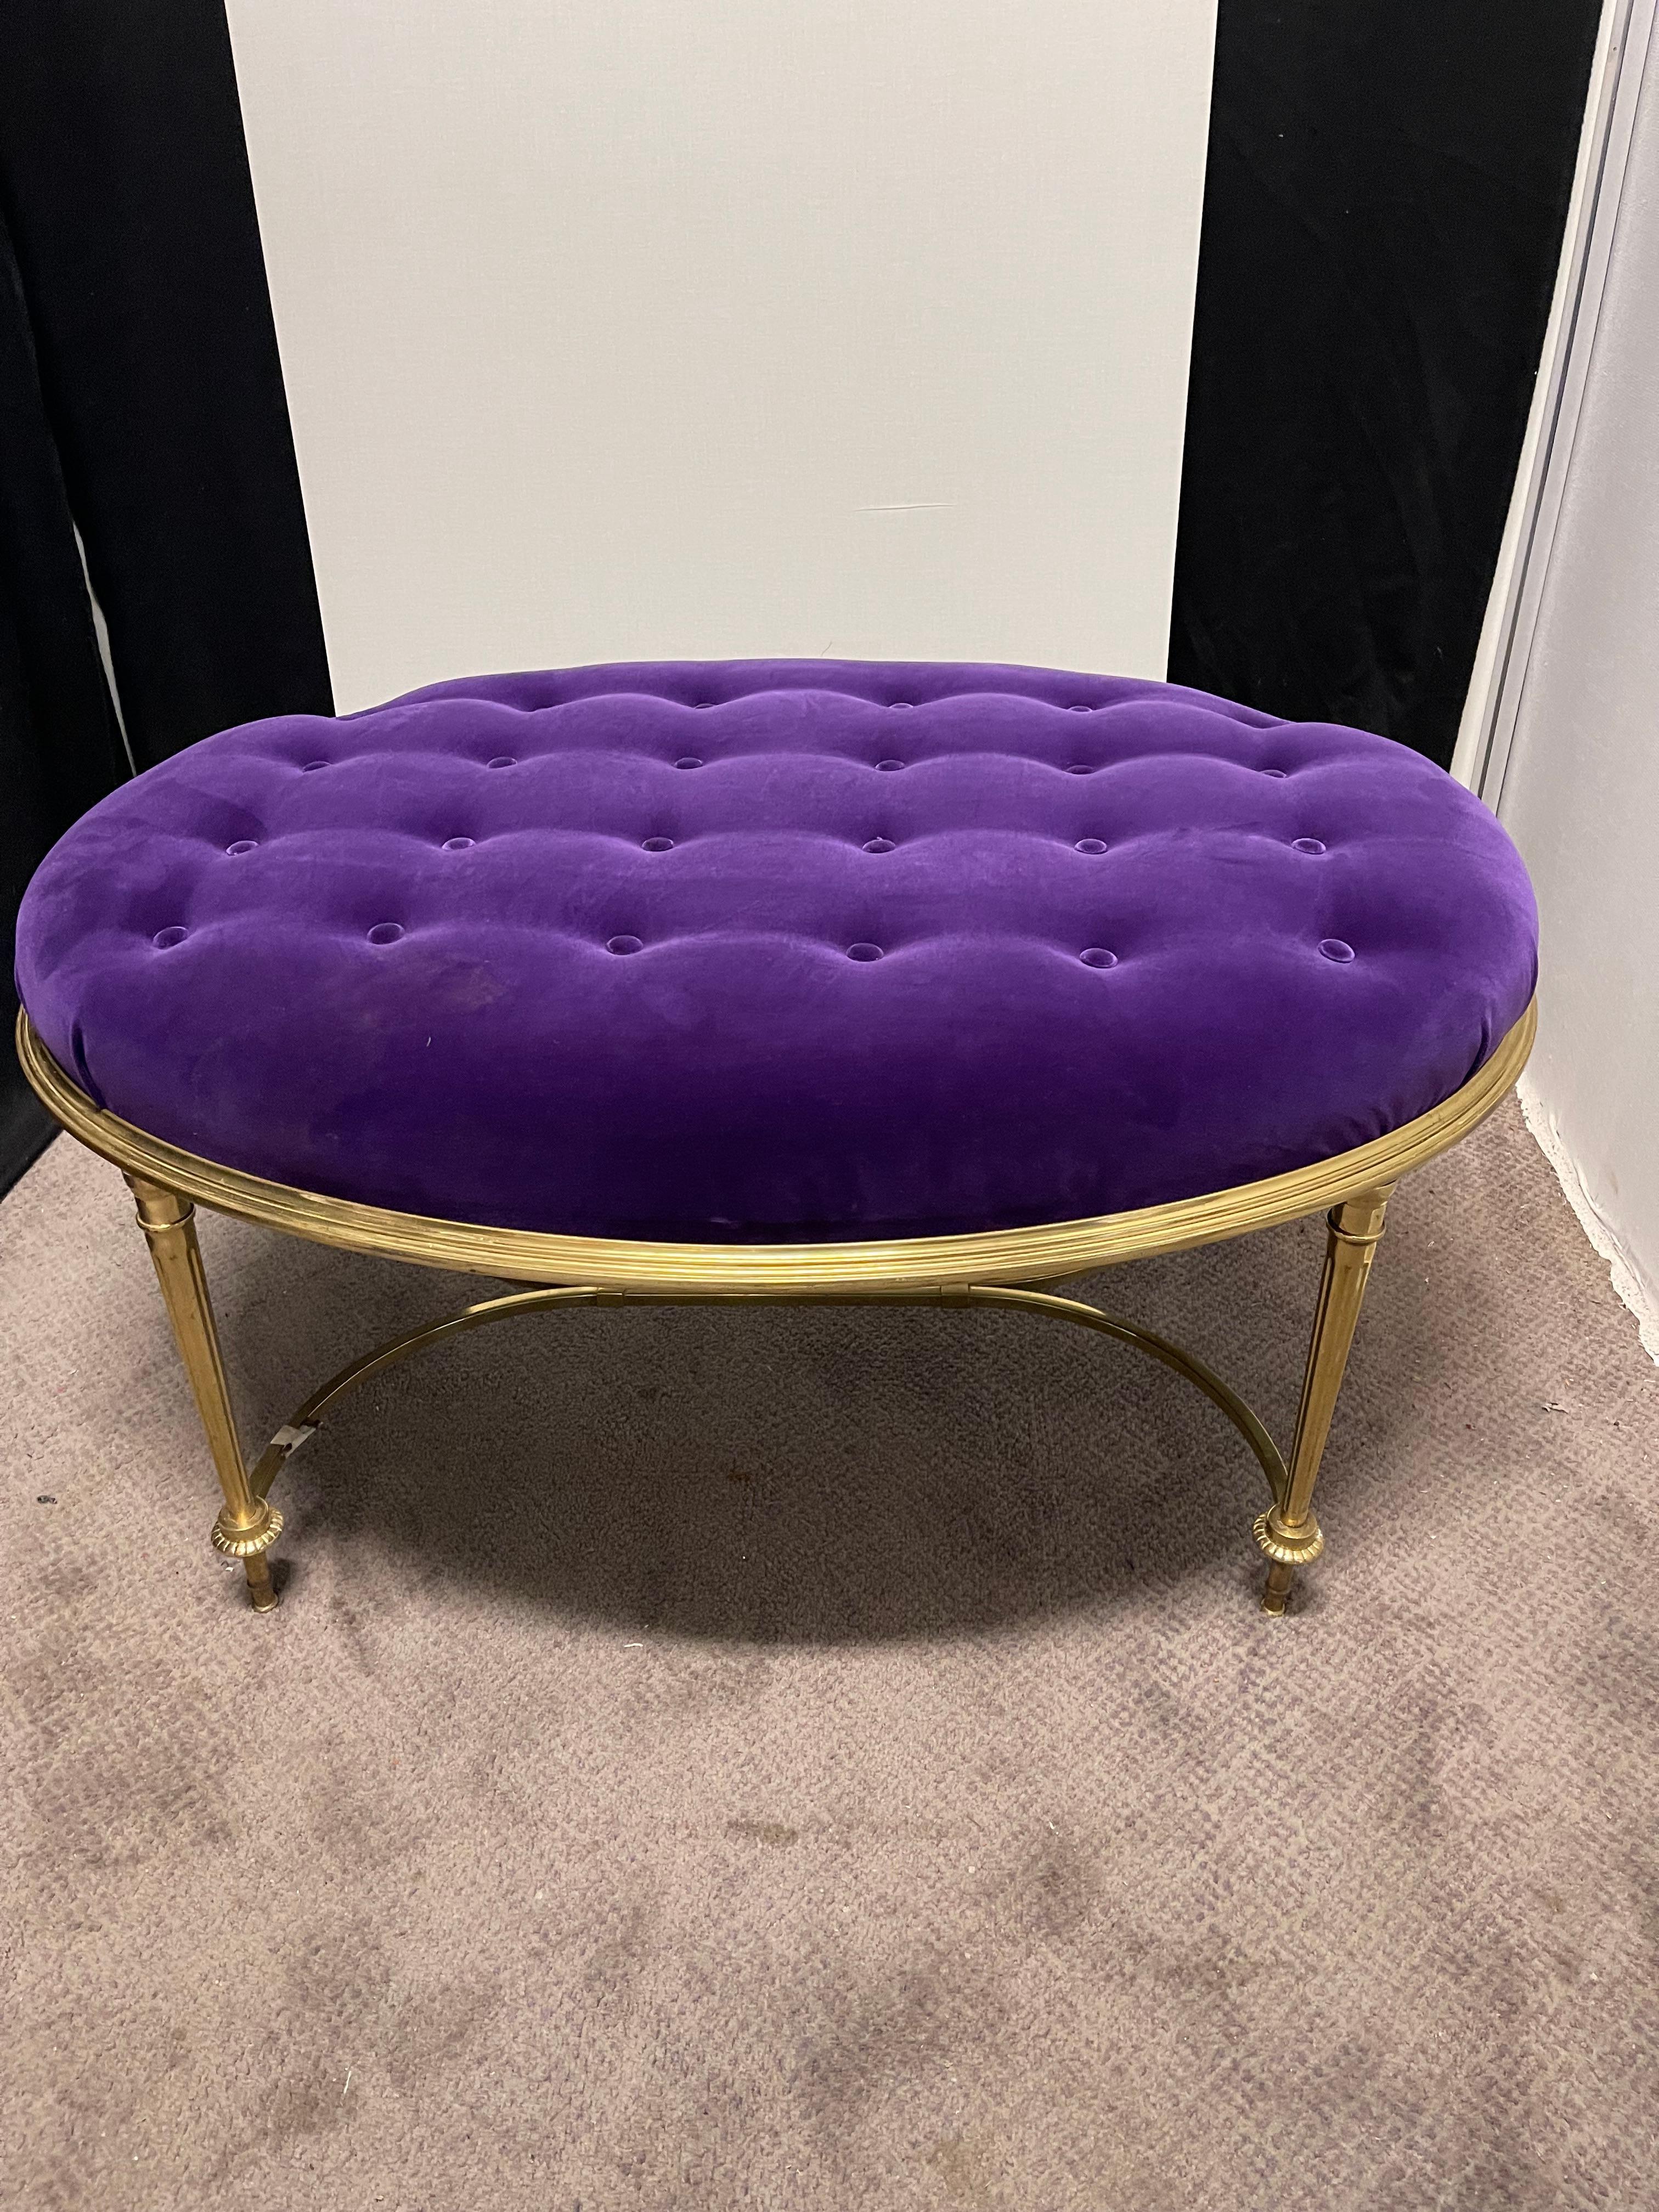 High quality solid brass bench with purple velvet upholstery.  Bench was recently upholstered with a tufted velvet top.  Made in the 1970s in the USA and sold by LaBarge. Excellent vintage condition.